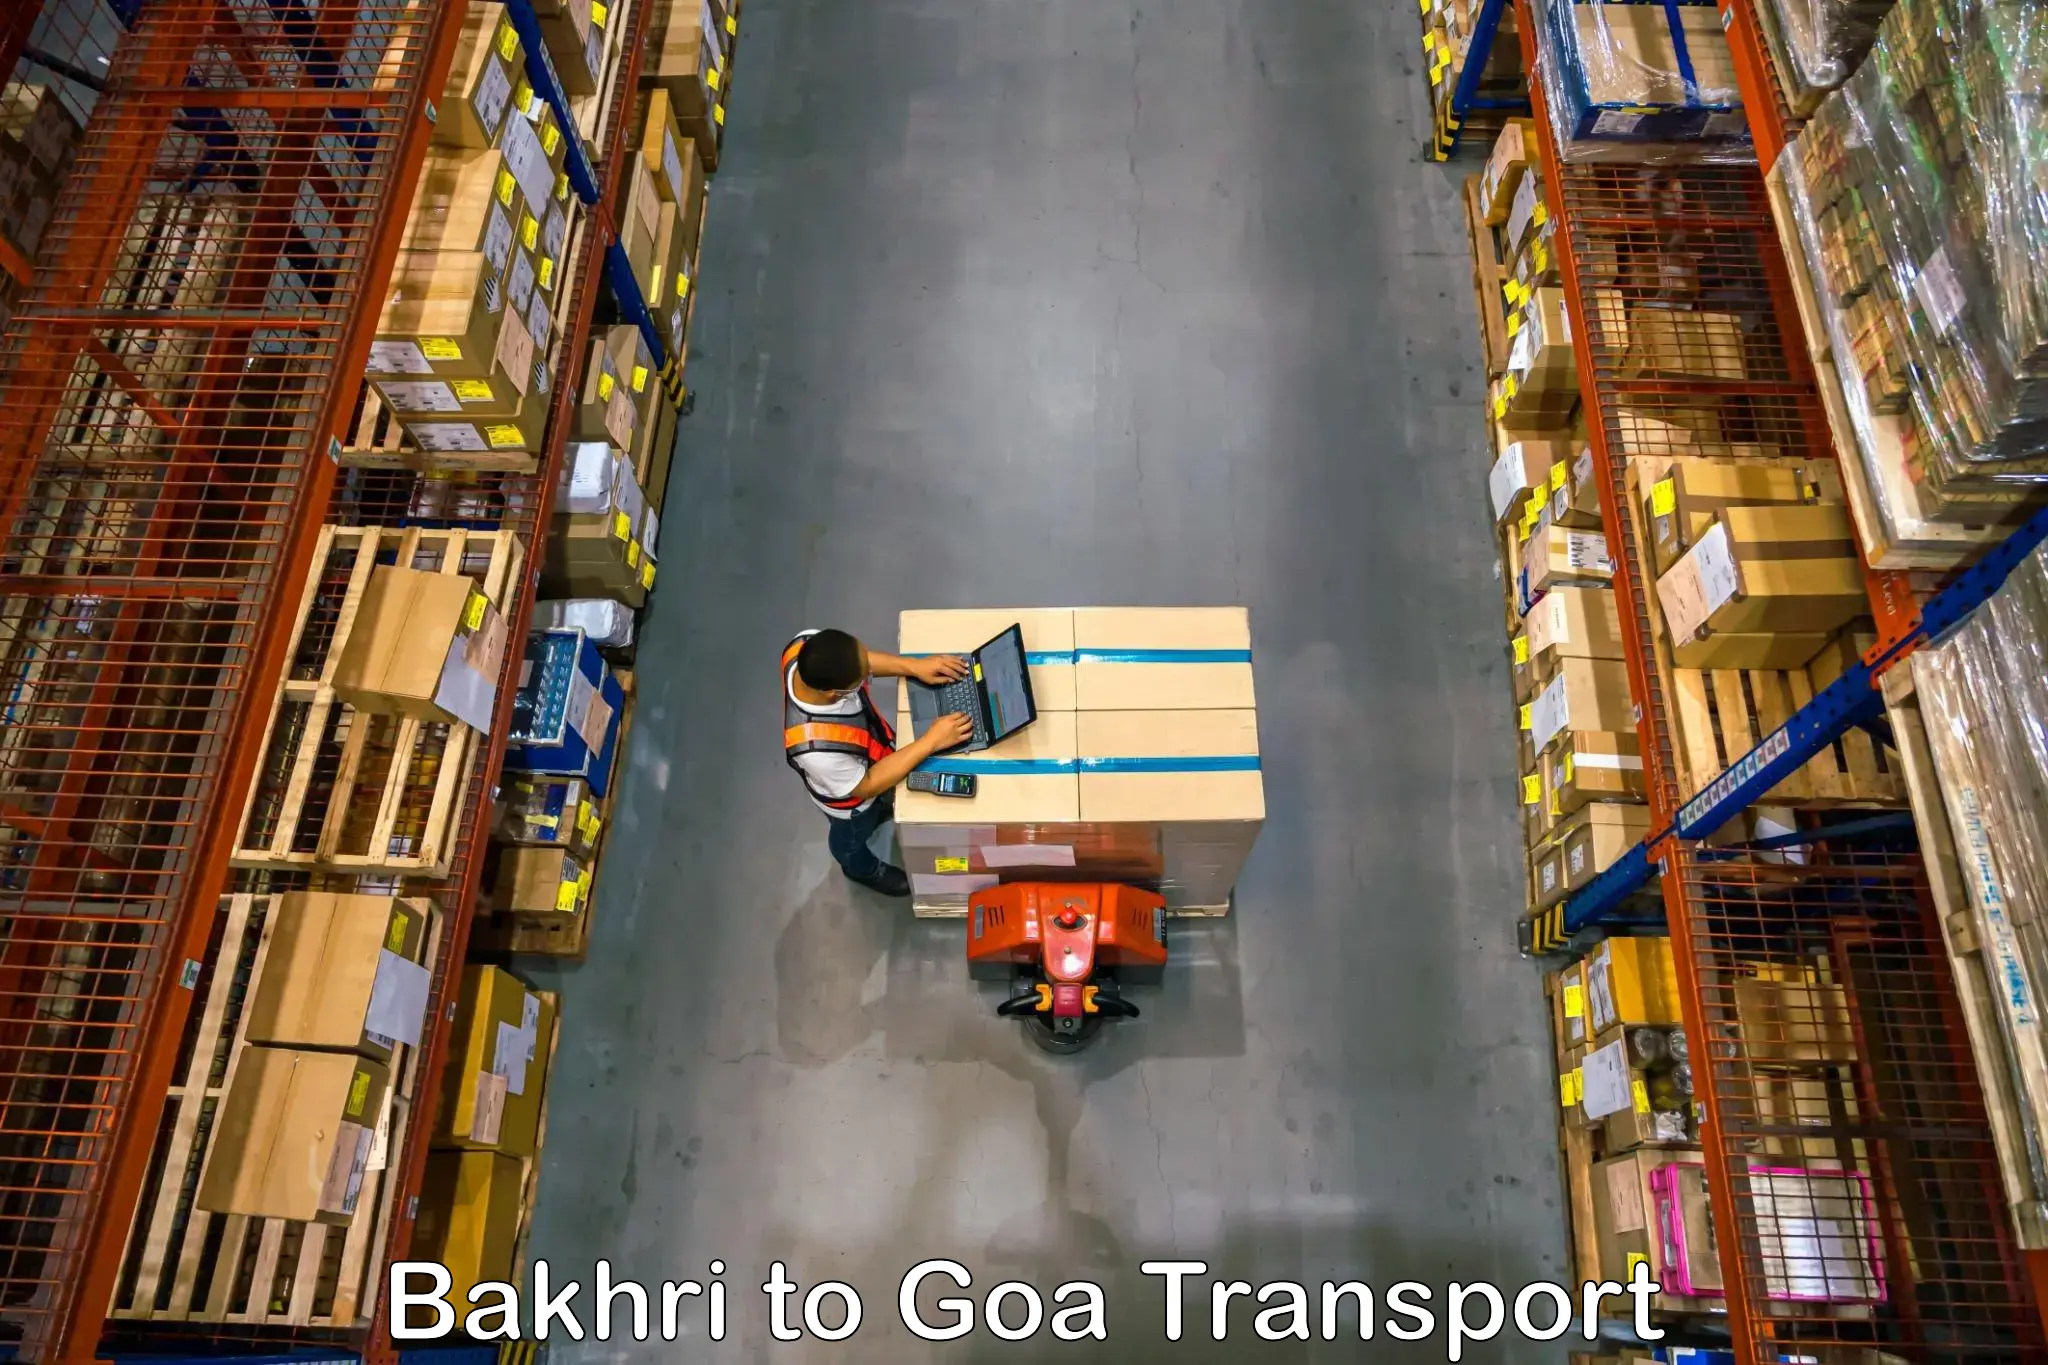 Air freight transport services in Bakhri to Goa